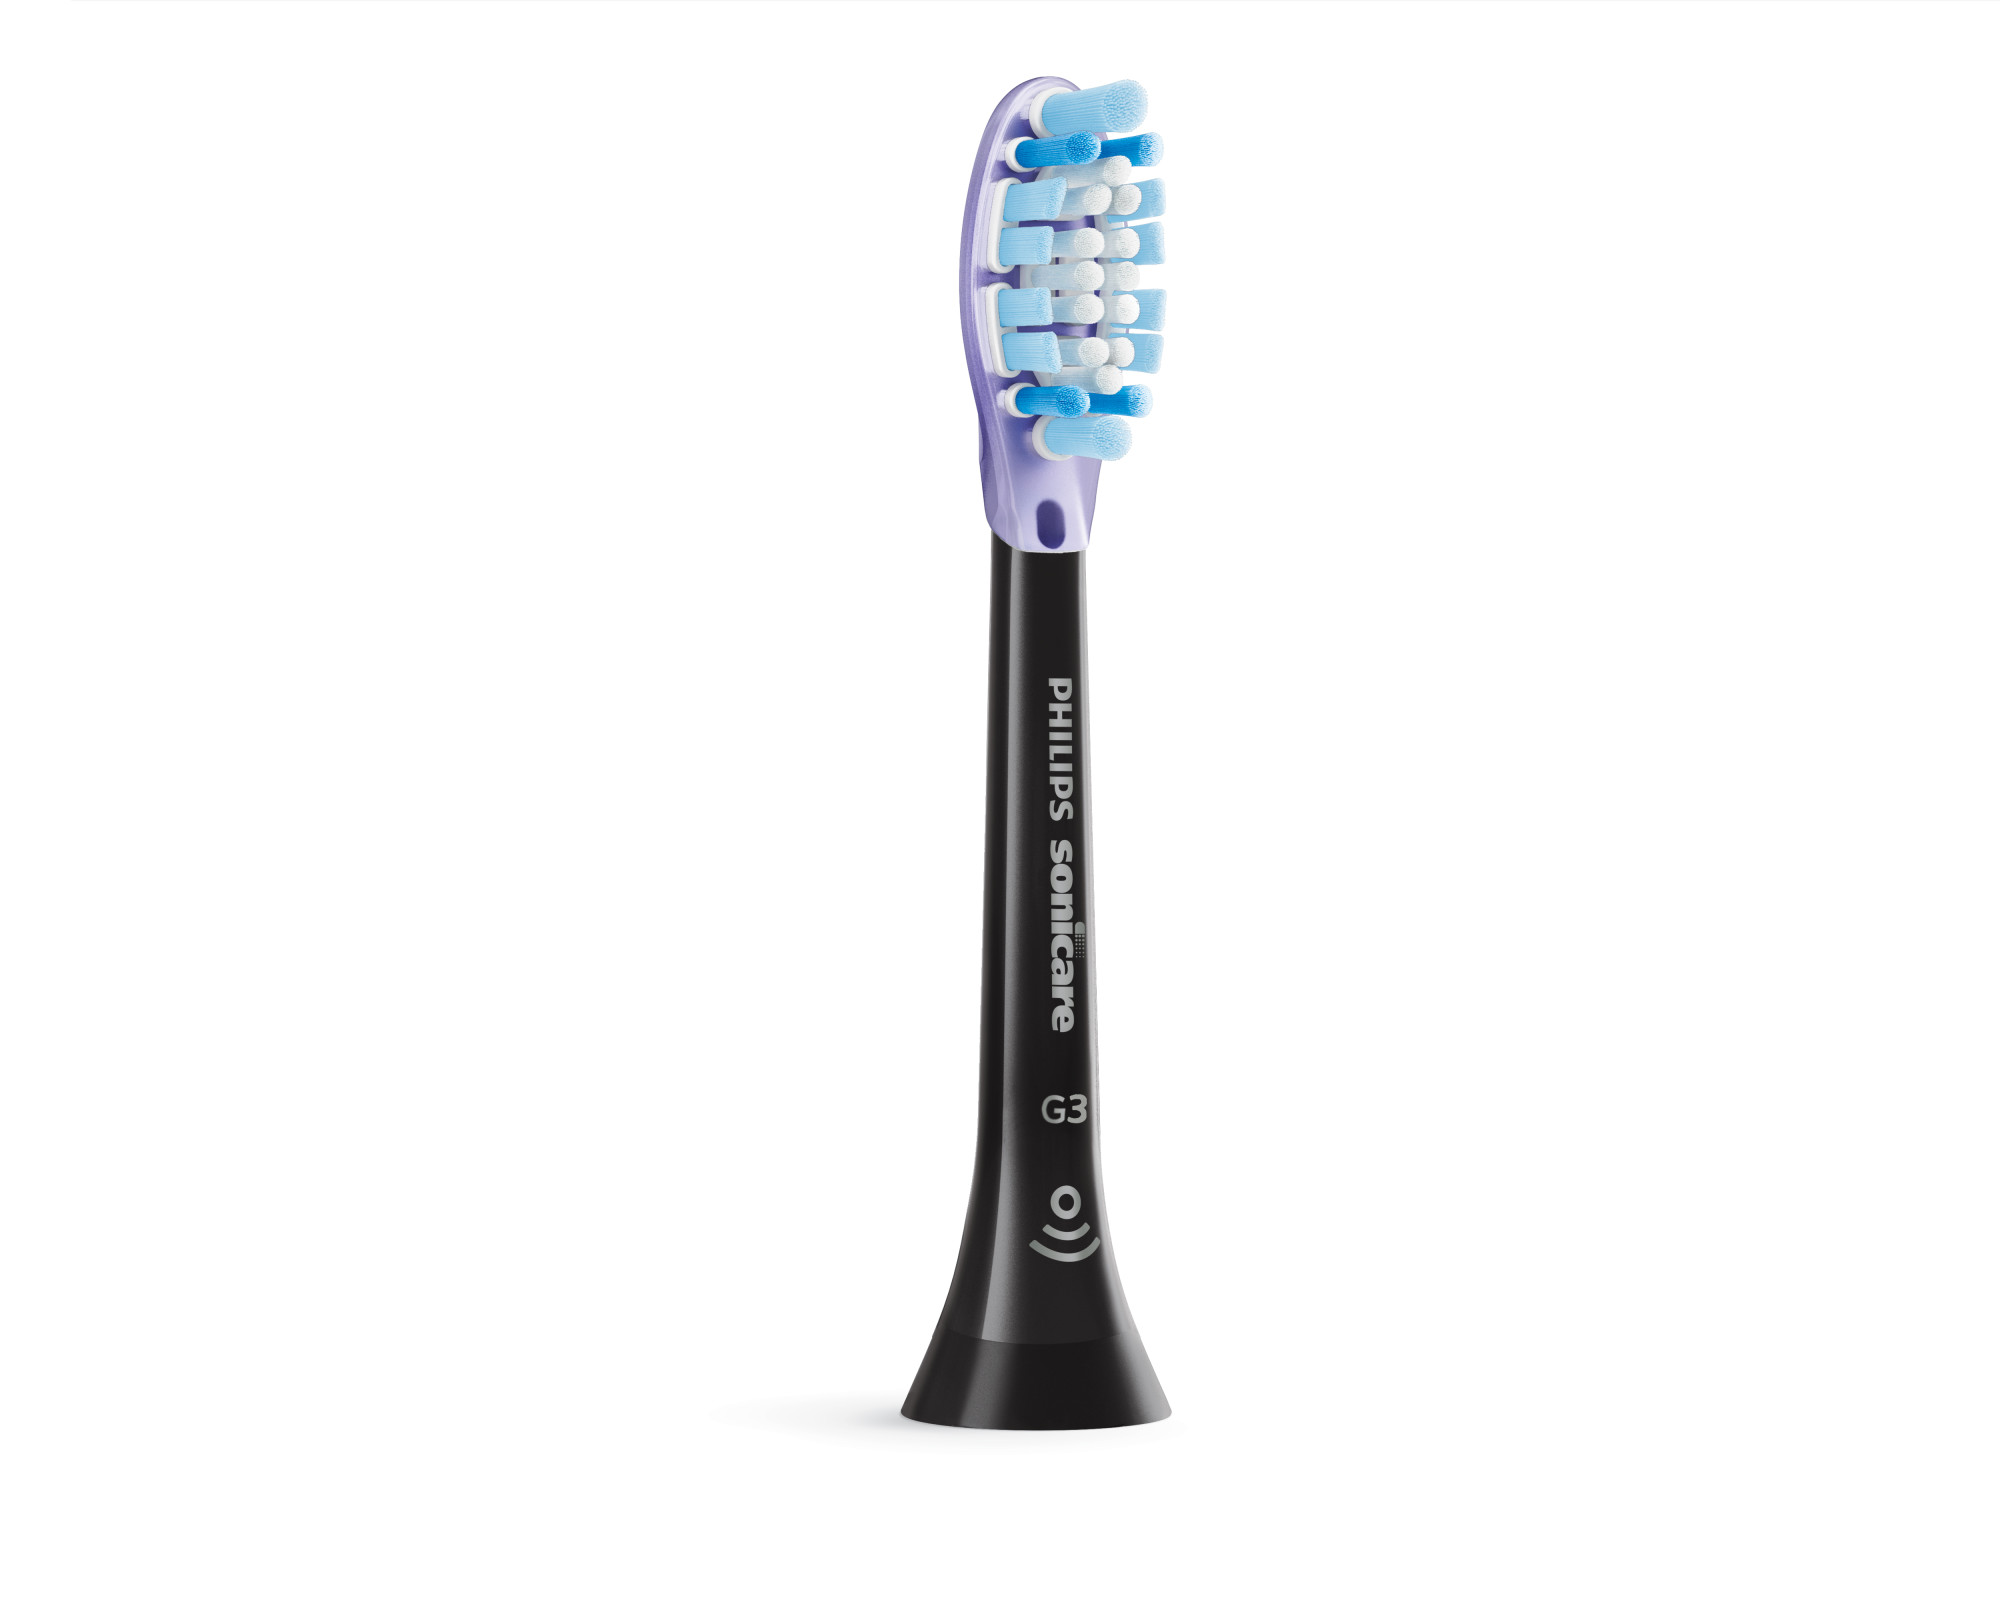 Philips Sonicare ExpertClean 7300, Rechargeable Electric Toothbrush, Black HX9610/17 - image 12 of 19